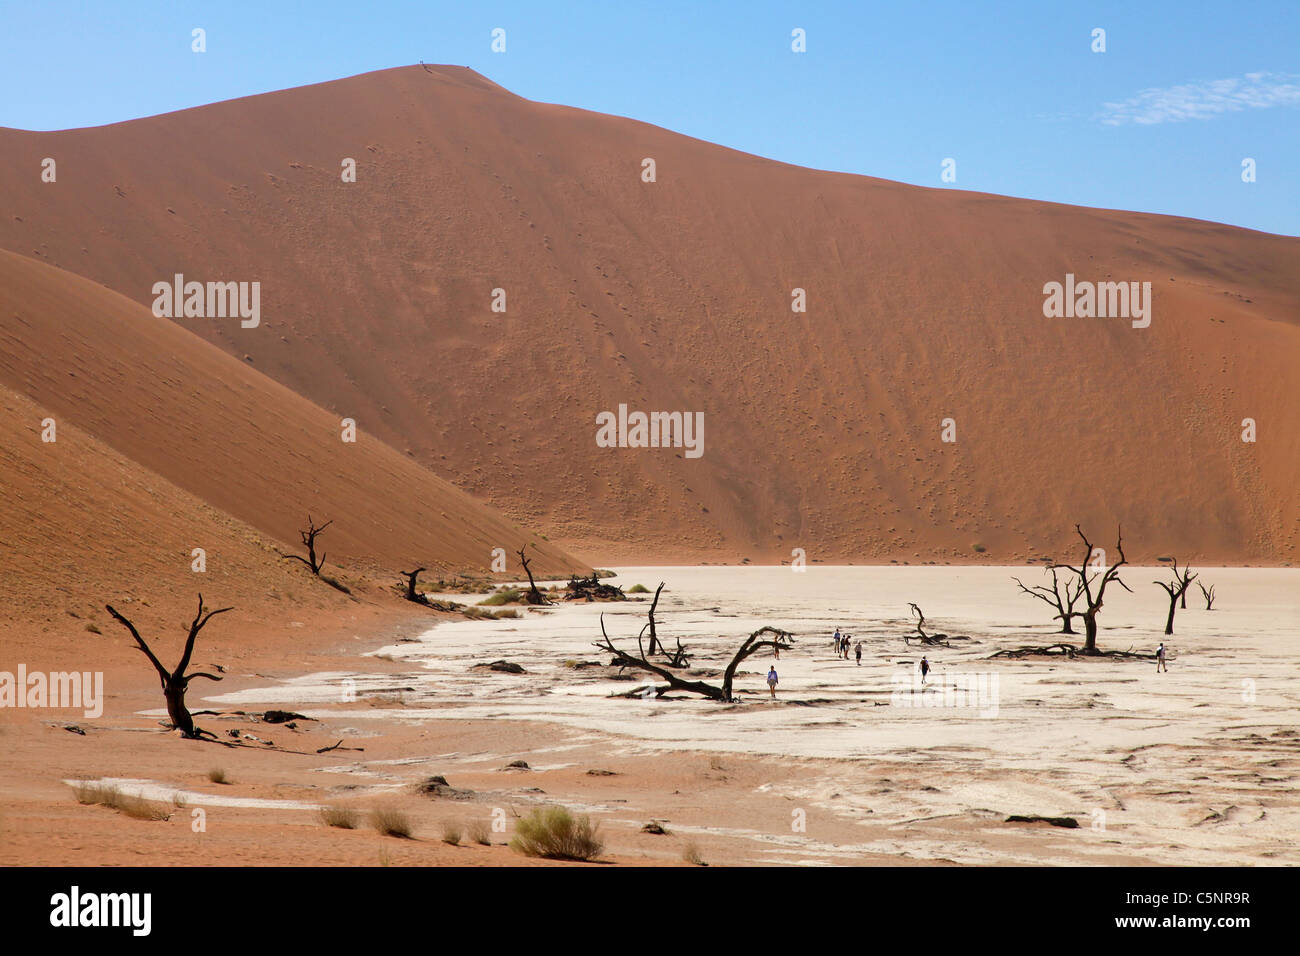 Deadvlei in the Sossusvlei area of the Namib desert - Namibia. Trees here have been dessicated for over 1000 years. Stock Photo